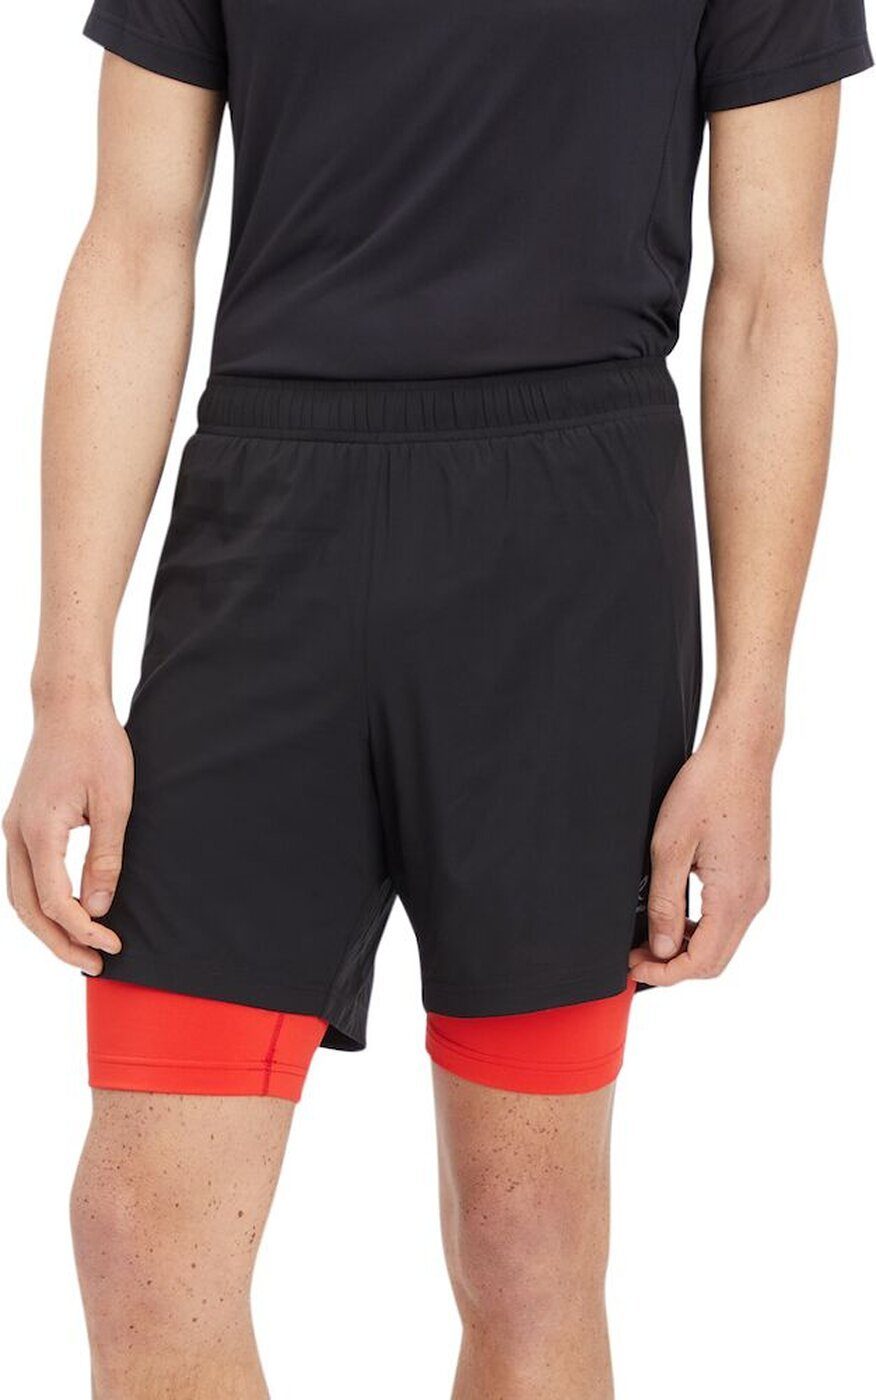 BLACK/RED 2-in-1-Shorts ux He.-Shorts Energetics Allen IV